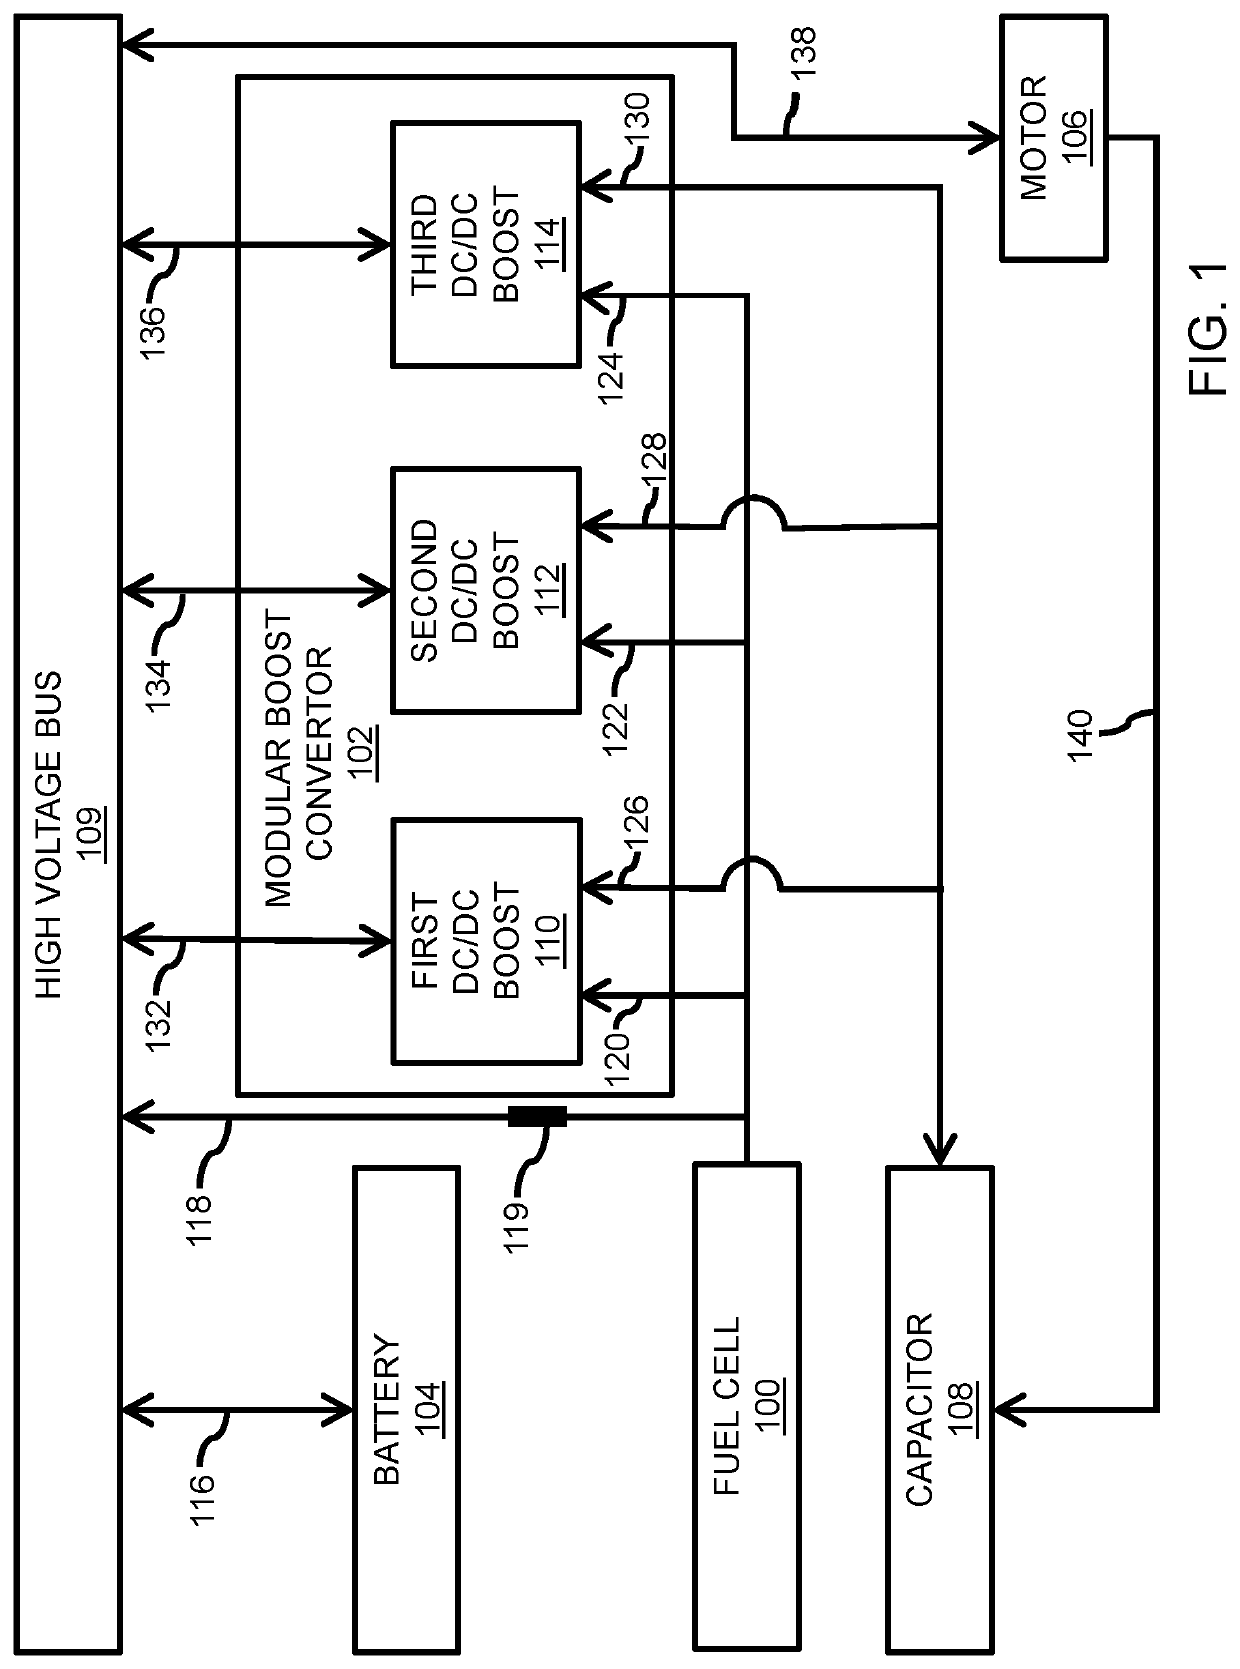 Modular boost converter system with super capacitor